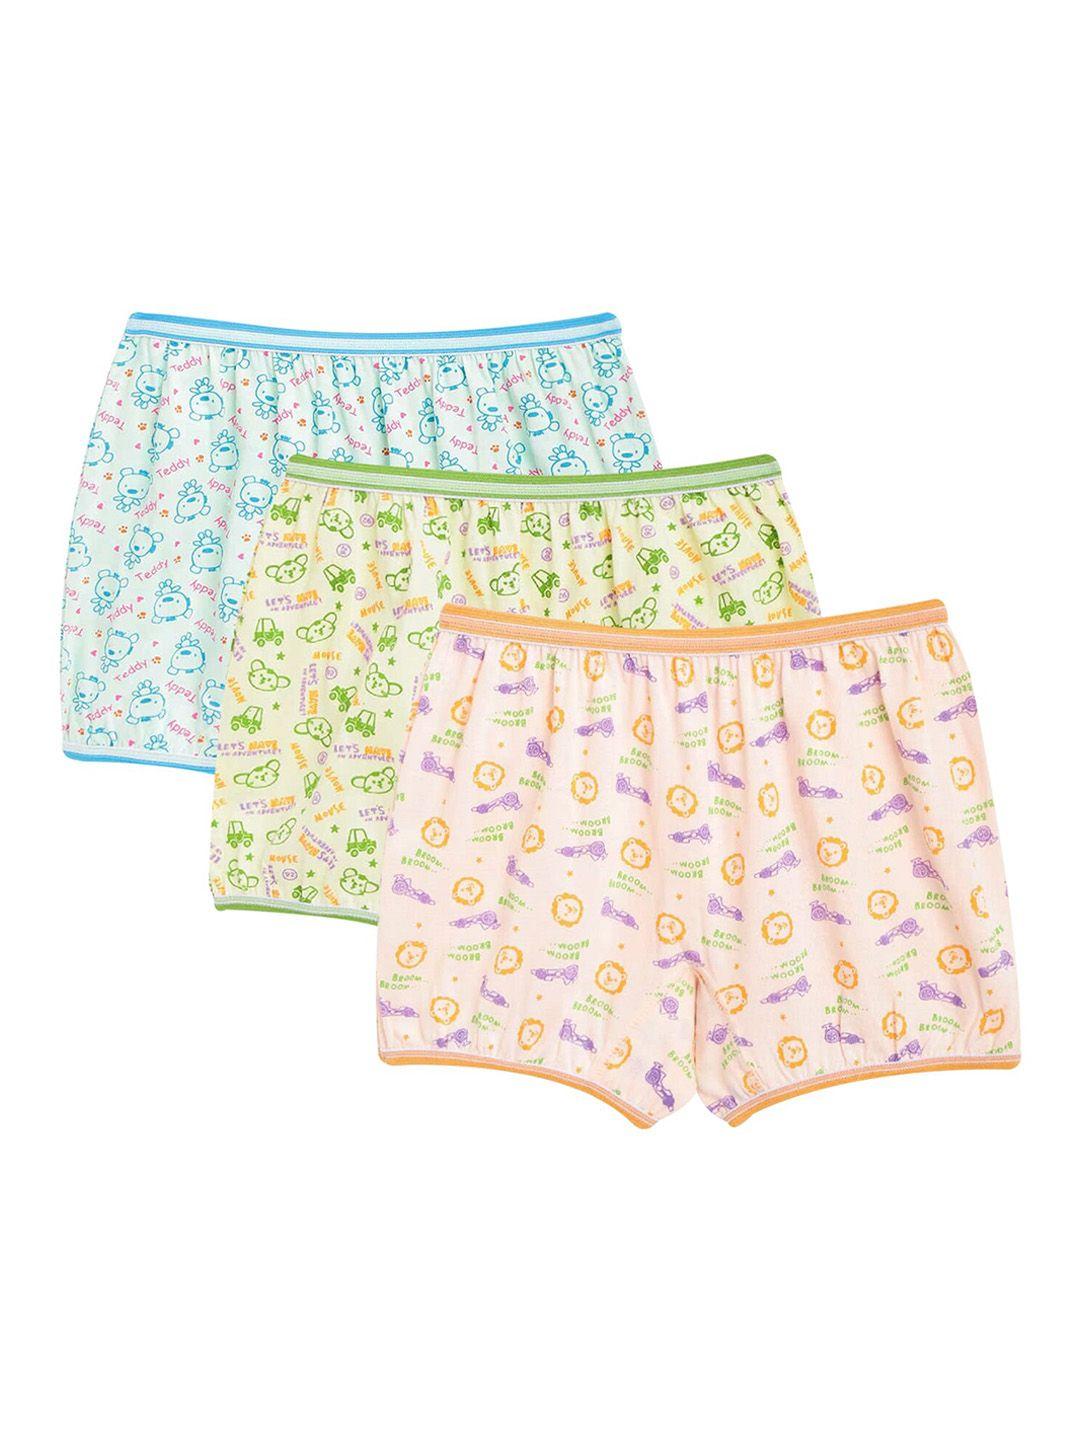 bodycare kids pack of 3 assorted printed cotton boy shorts briefs